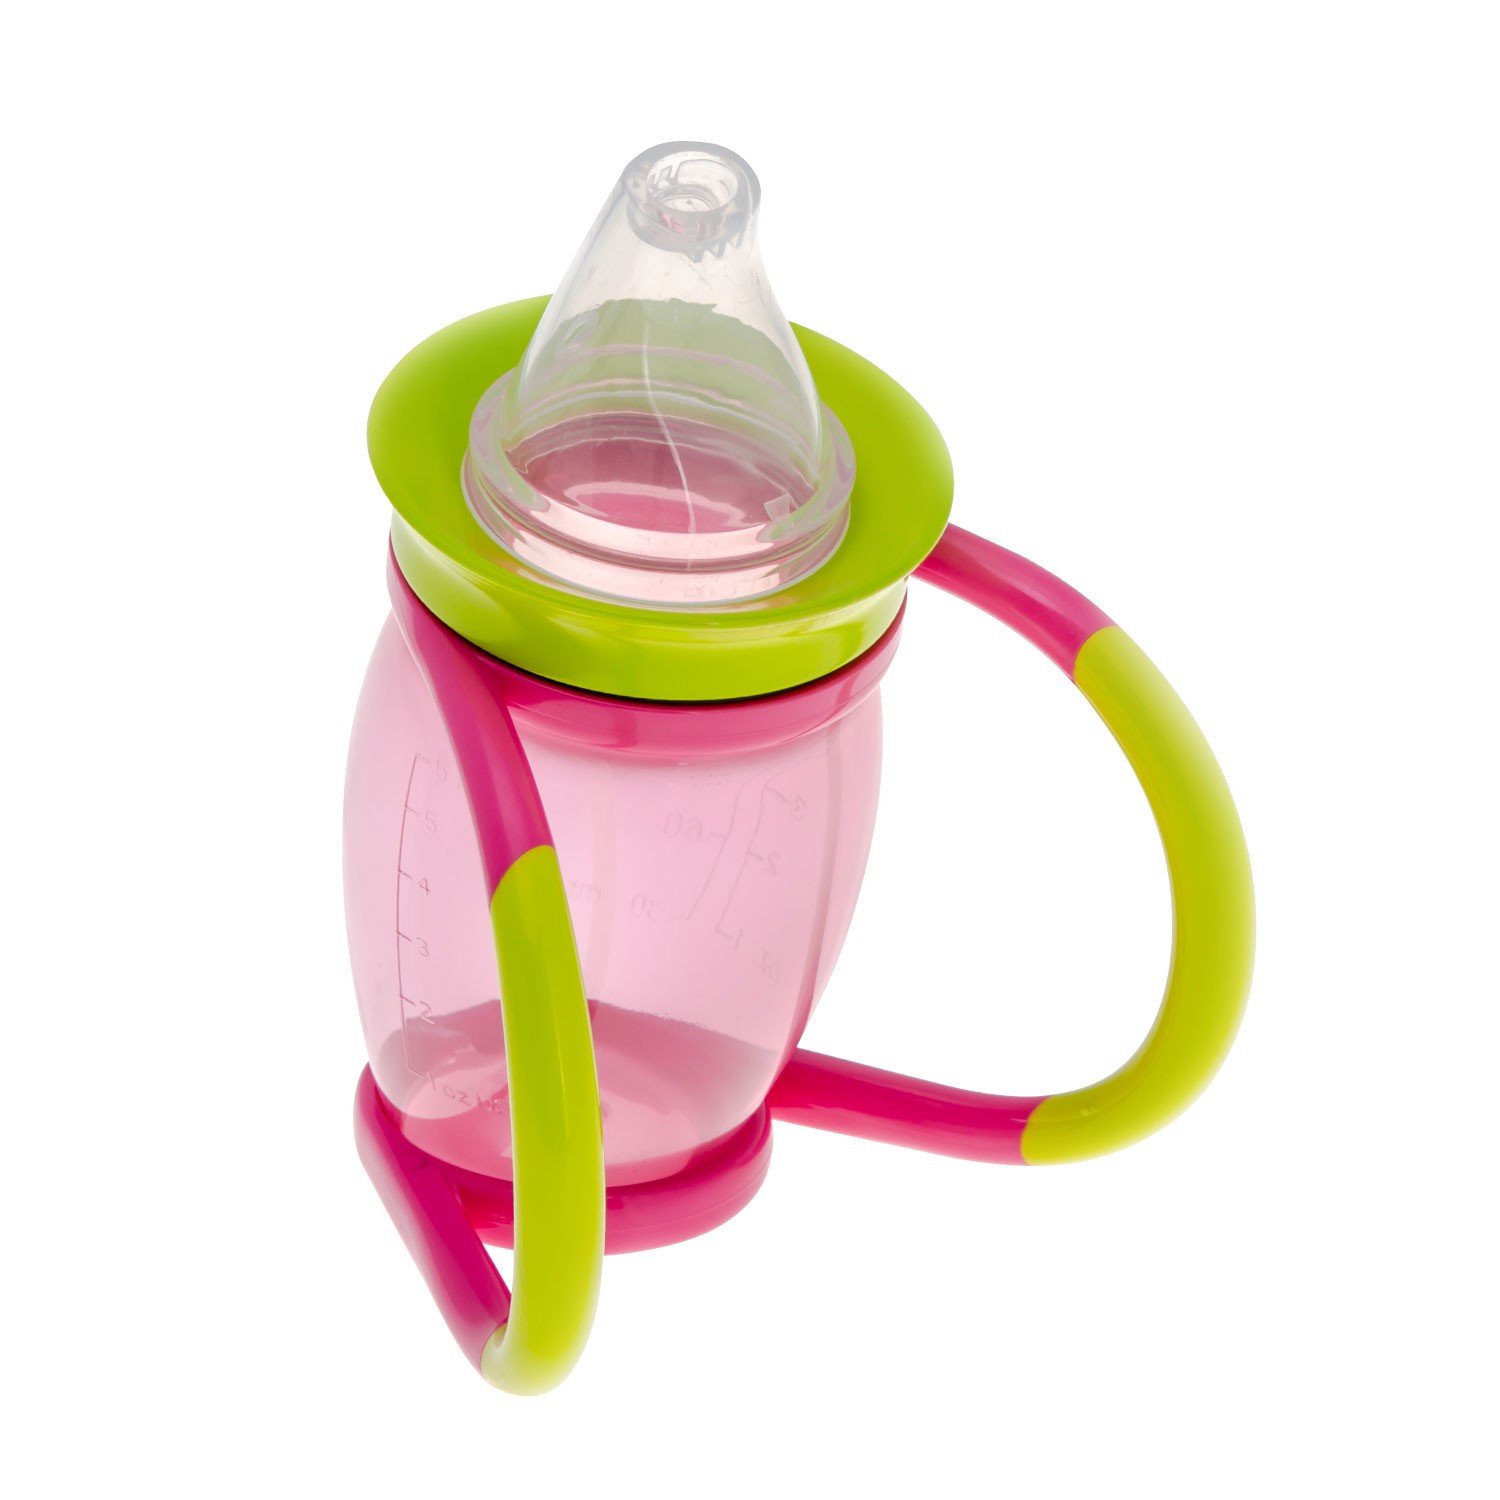 Brother max – 4 in 1 Trainer Cup (Pink/Green)